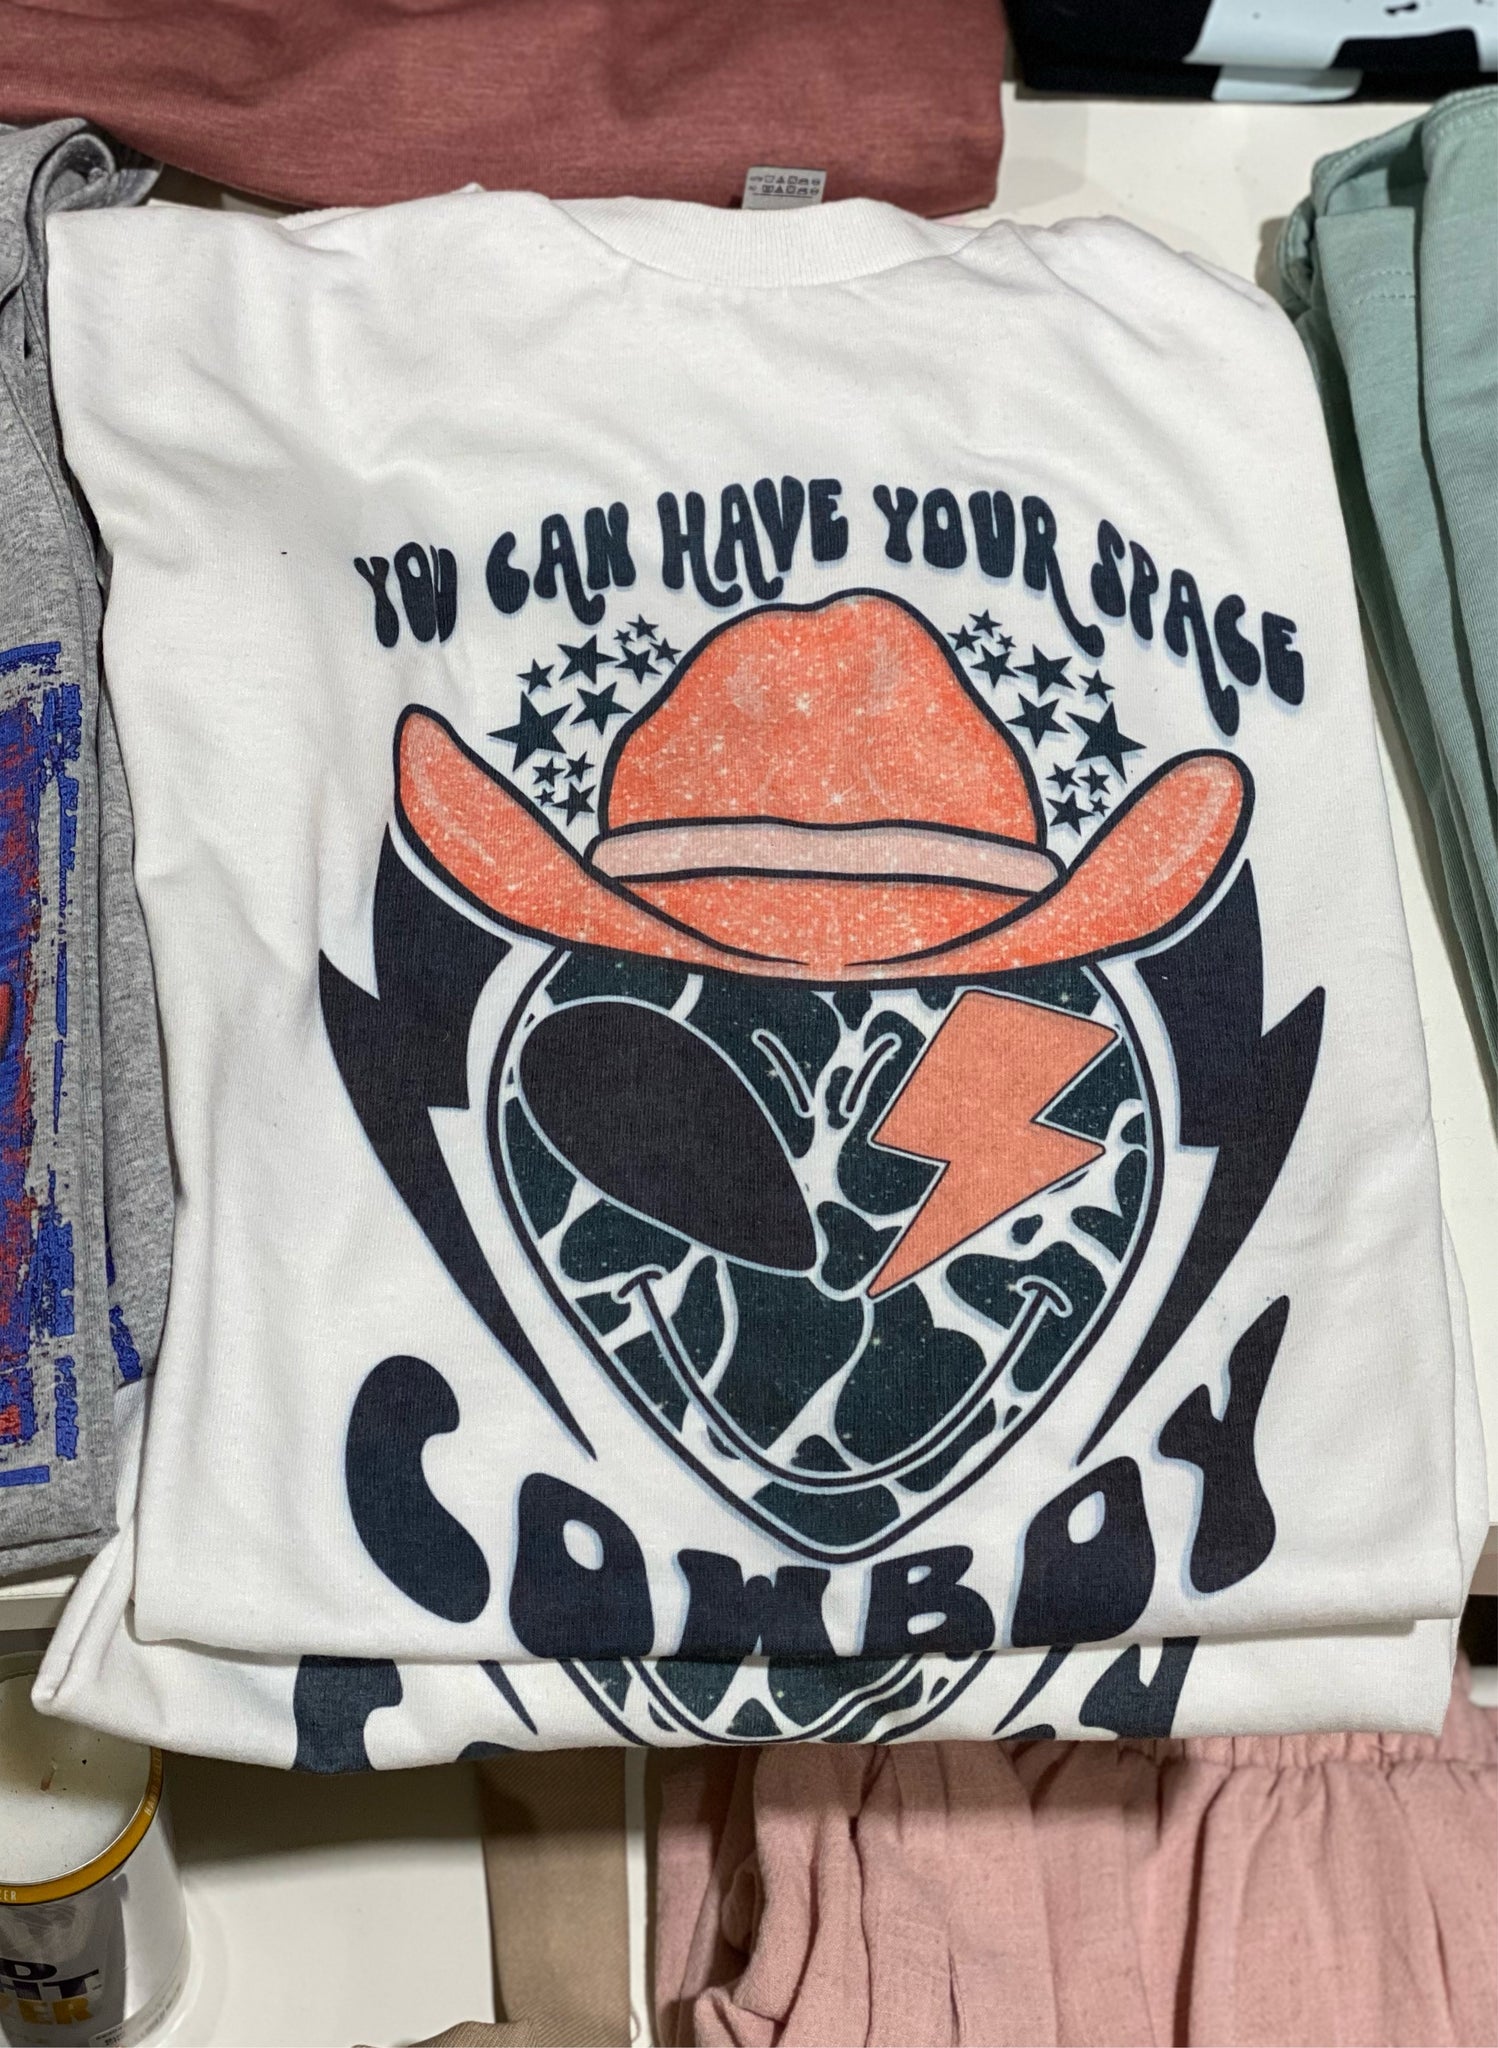 You can have your space cowboy